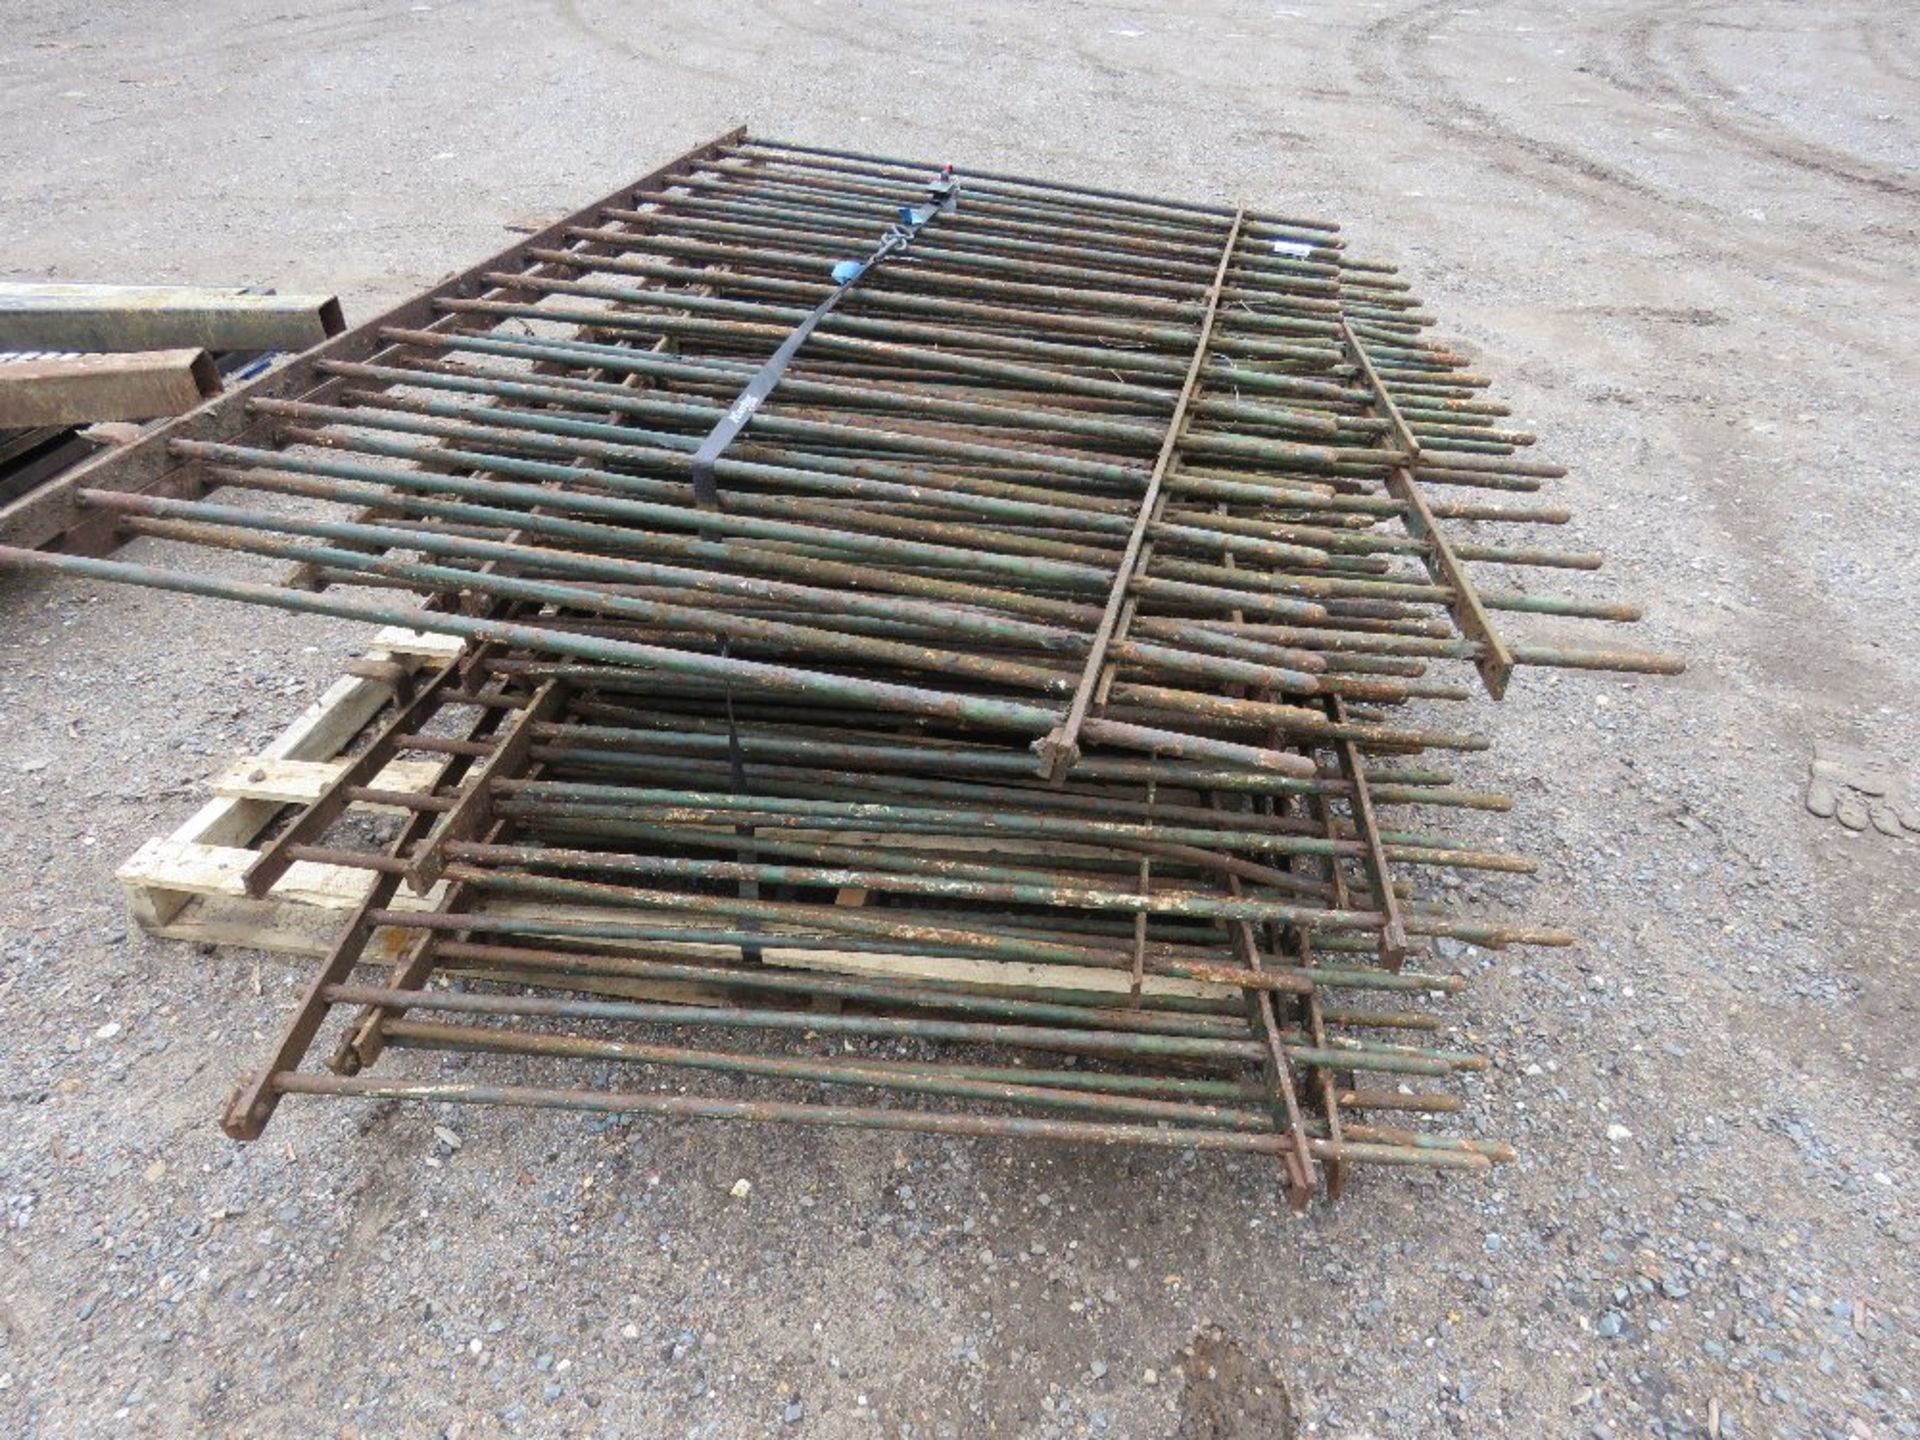 LARGE STACK OF OLD IRON RAILINGS, 1.3M HEIGHT APPROX. NO VAT ON HAMMER PRICE. - Image 3 of 4